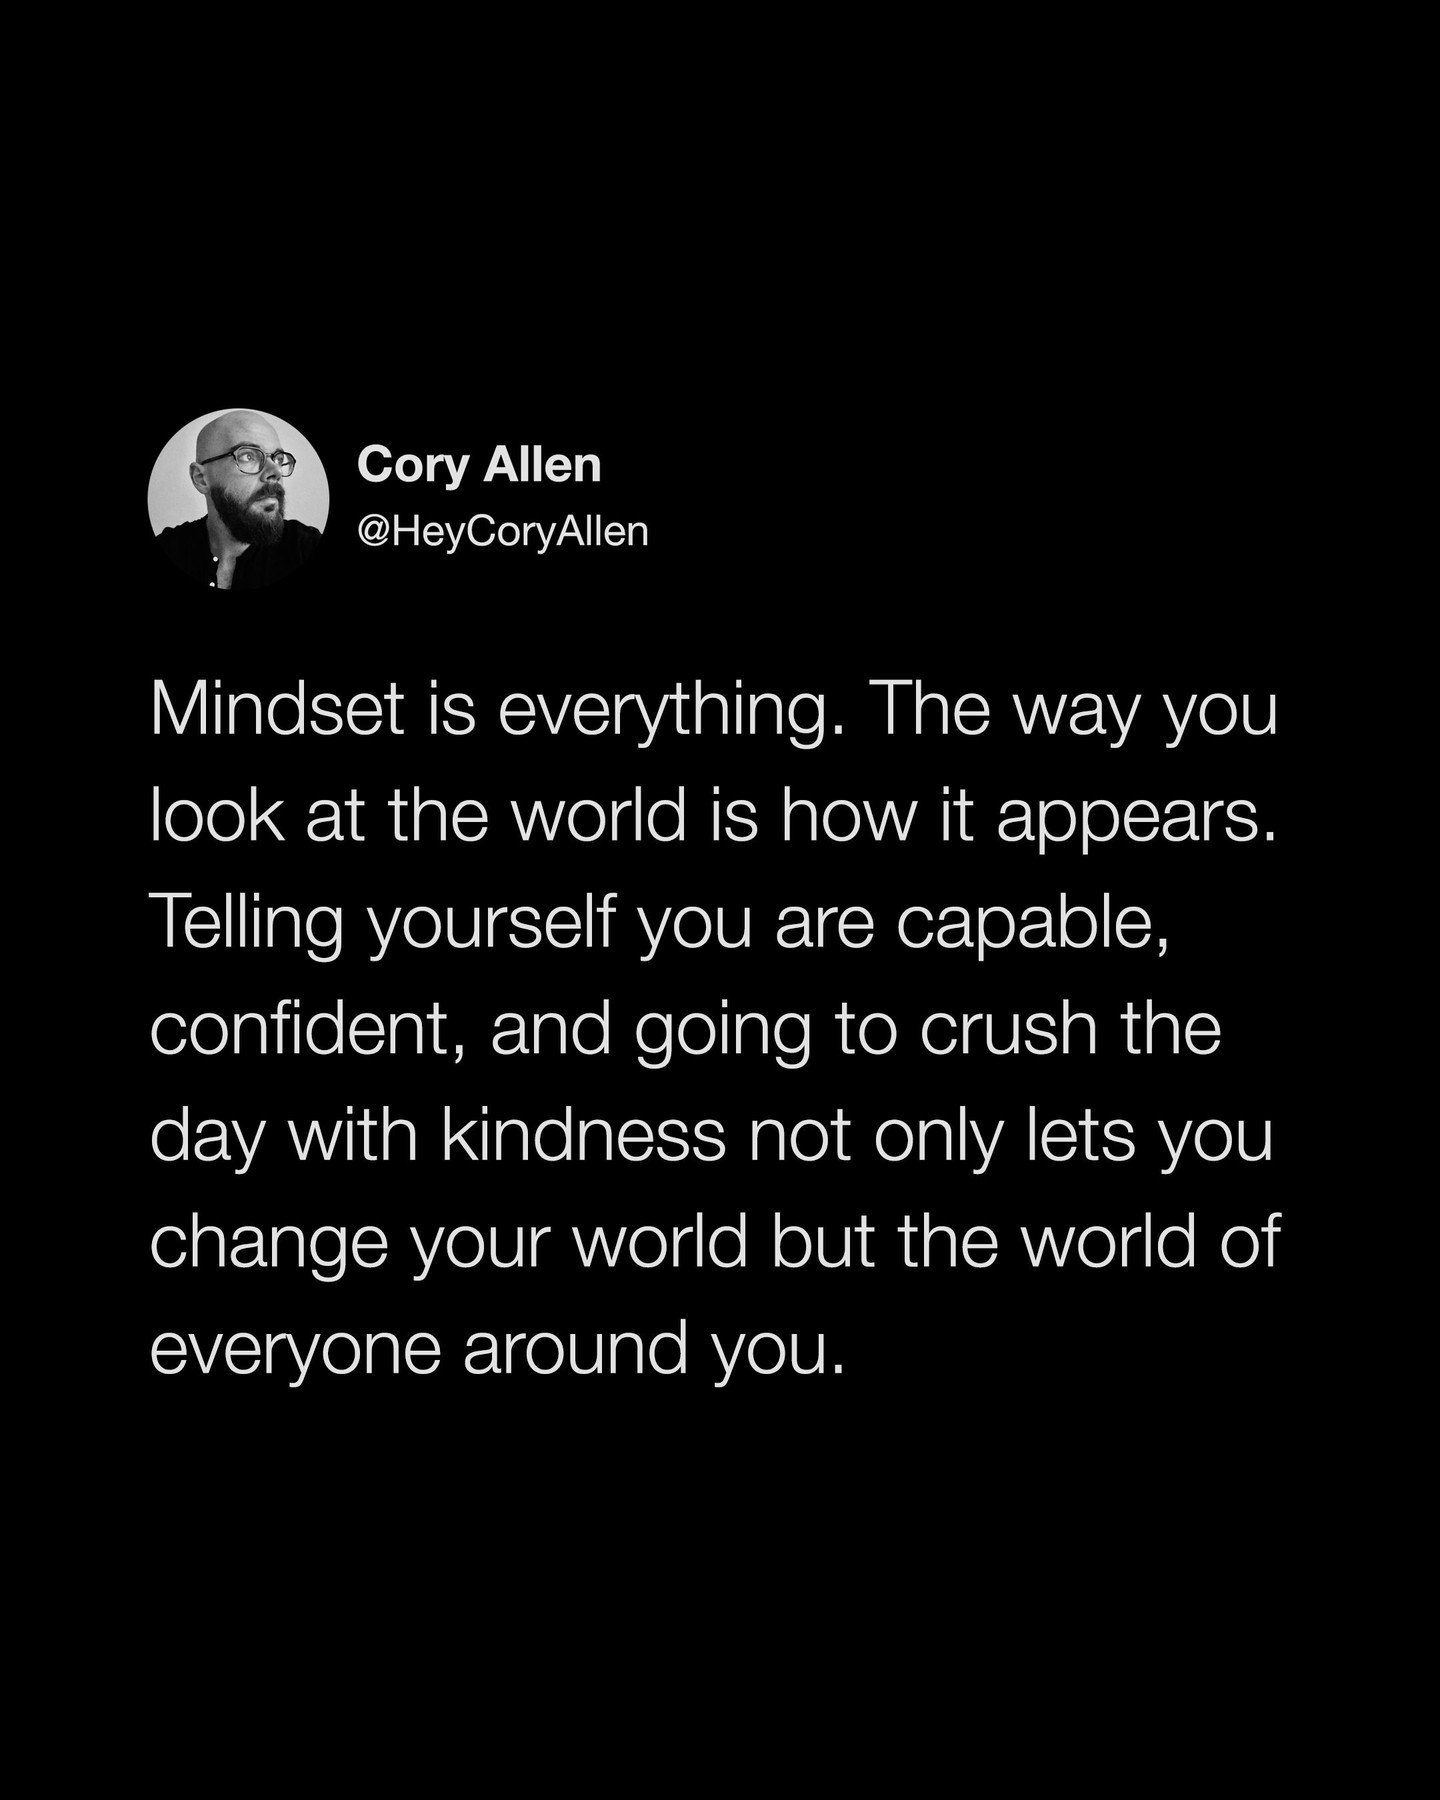 Your mindset shapes how life appears to you. That means that when you feel positive and energized, you'll be more optimistic, compassionate, and full of self-belief. On the other hand, when you're feeling down, you'll see the world as more limited, c